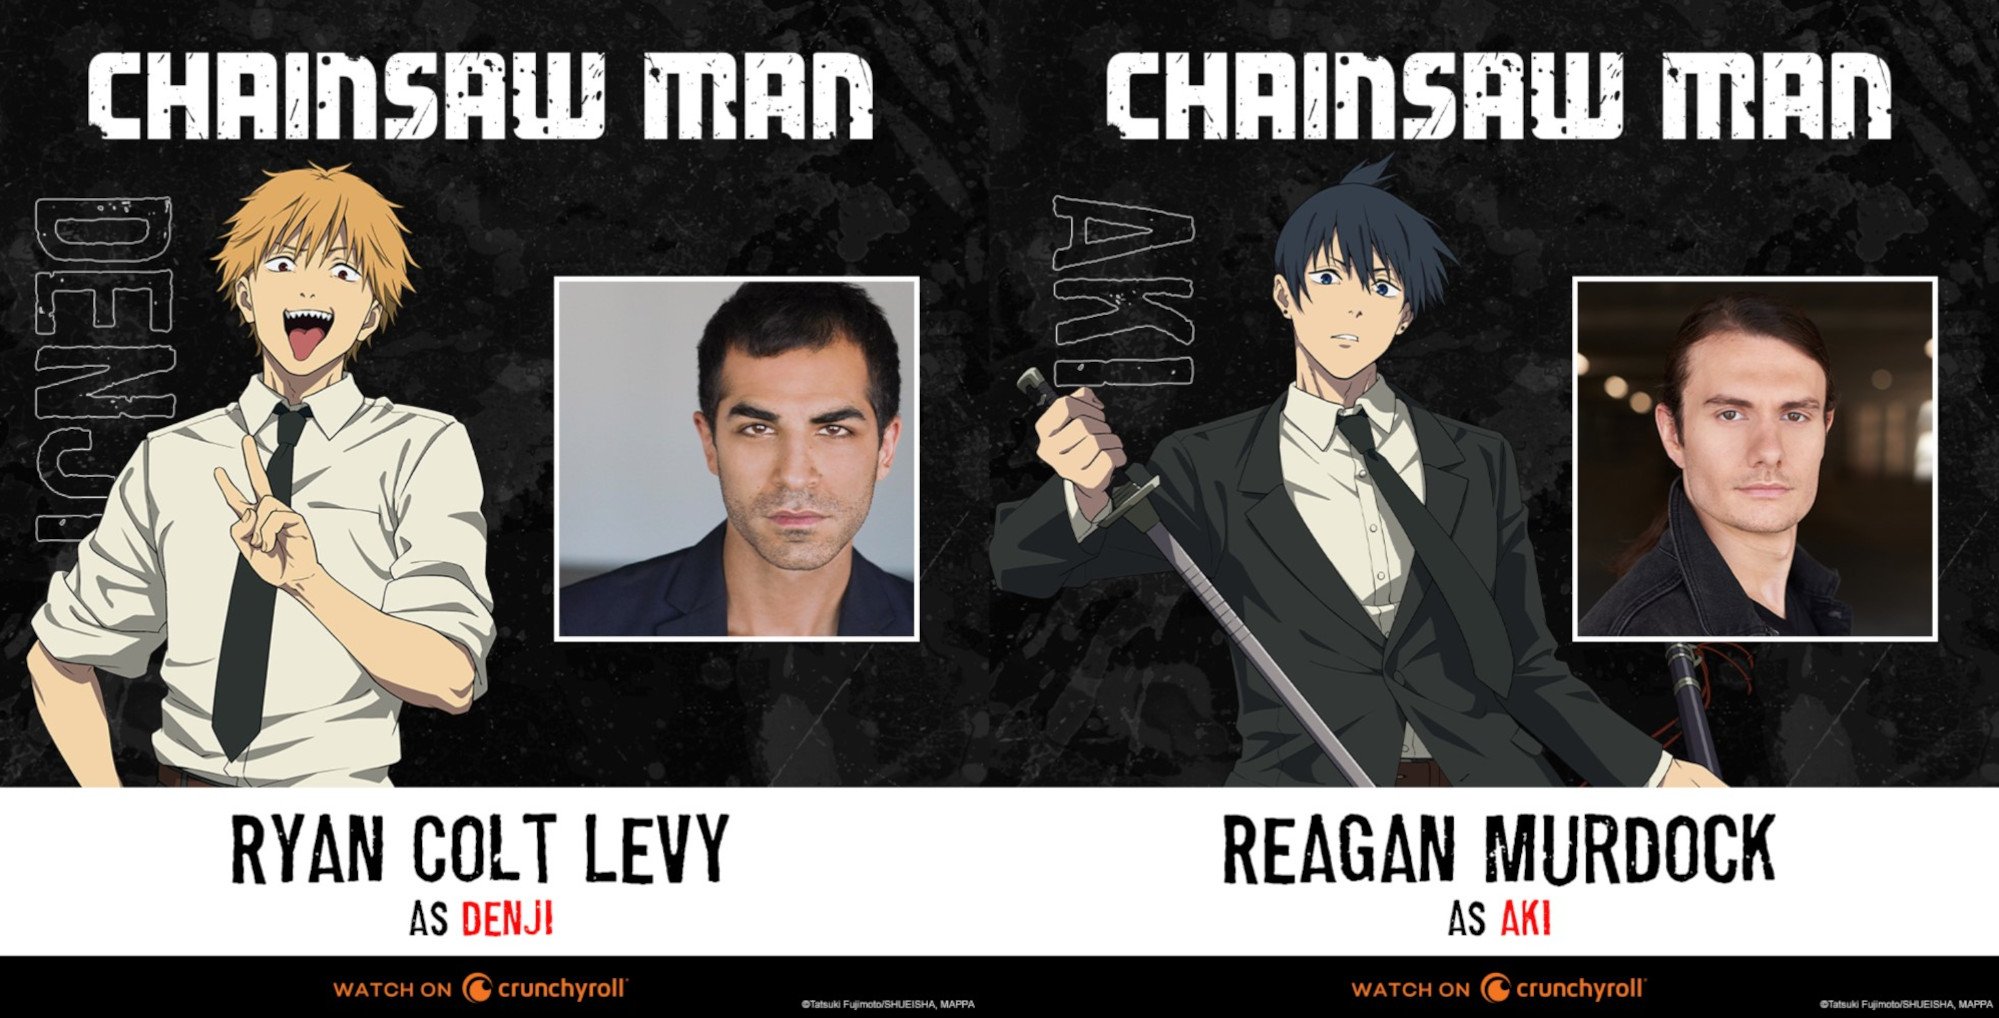 'Chainsaw Man' images featuring the dub cast and character image for Denji and Aki.